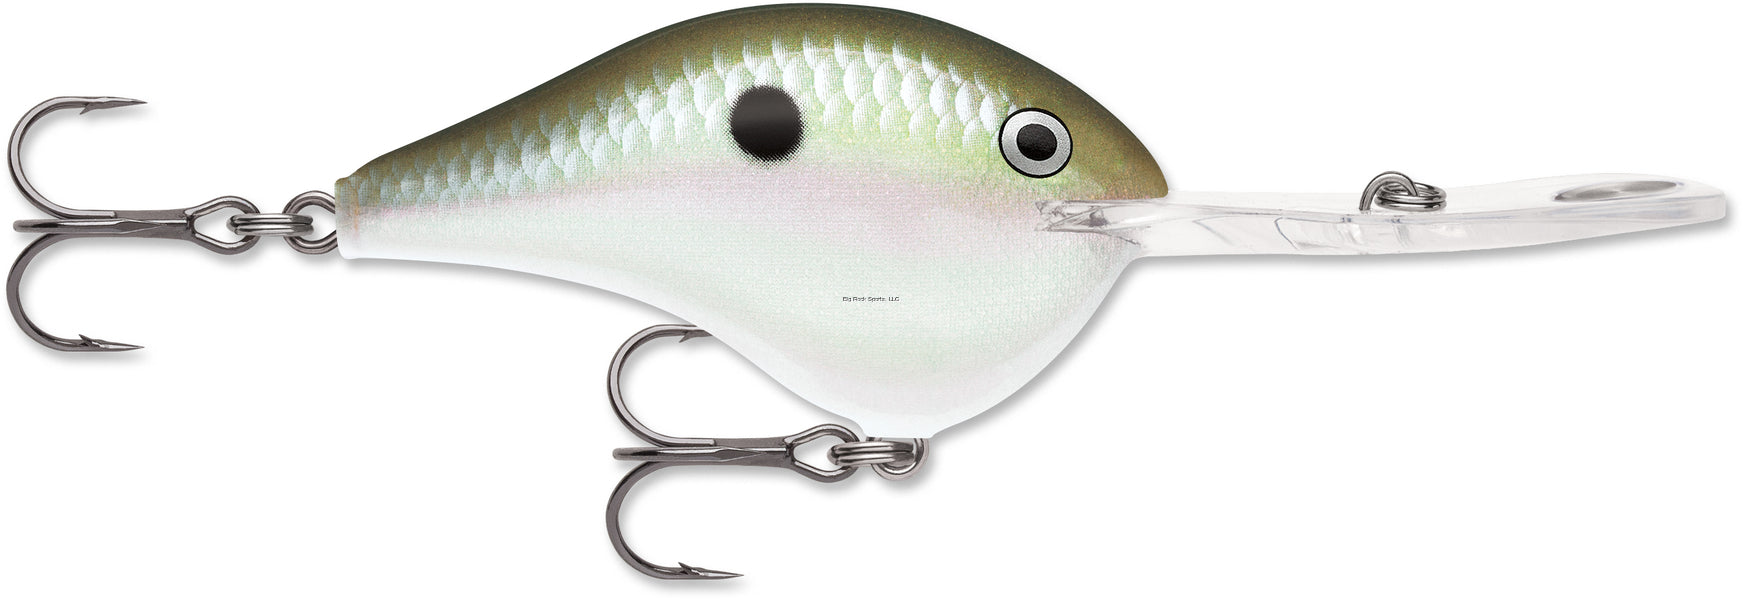 Rapala DT Metal 20 Floating-Diving, Green Gizzard Shad, 2-3/4", 7/8oz